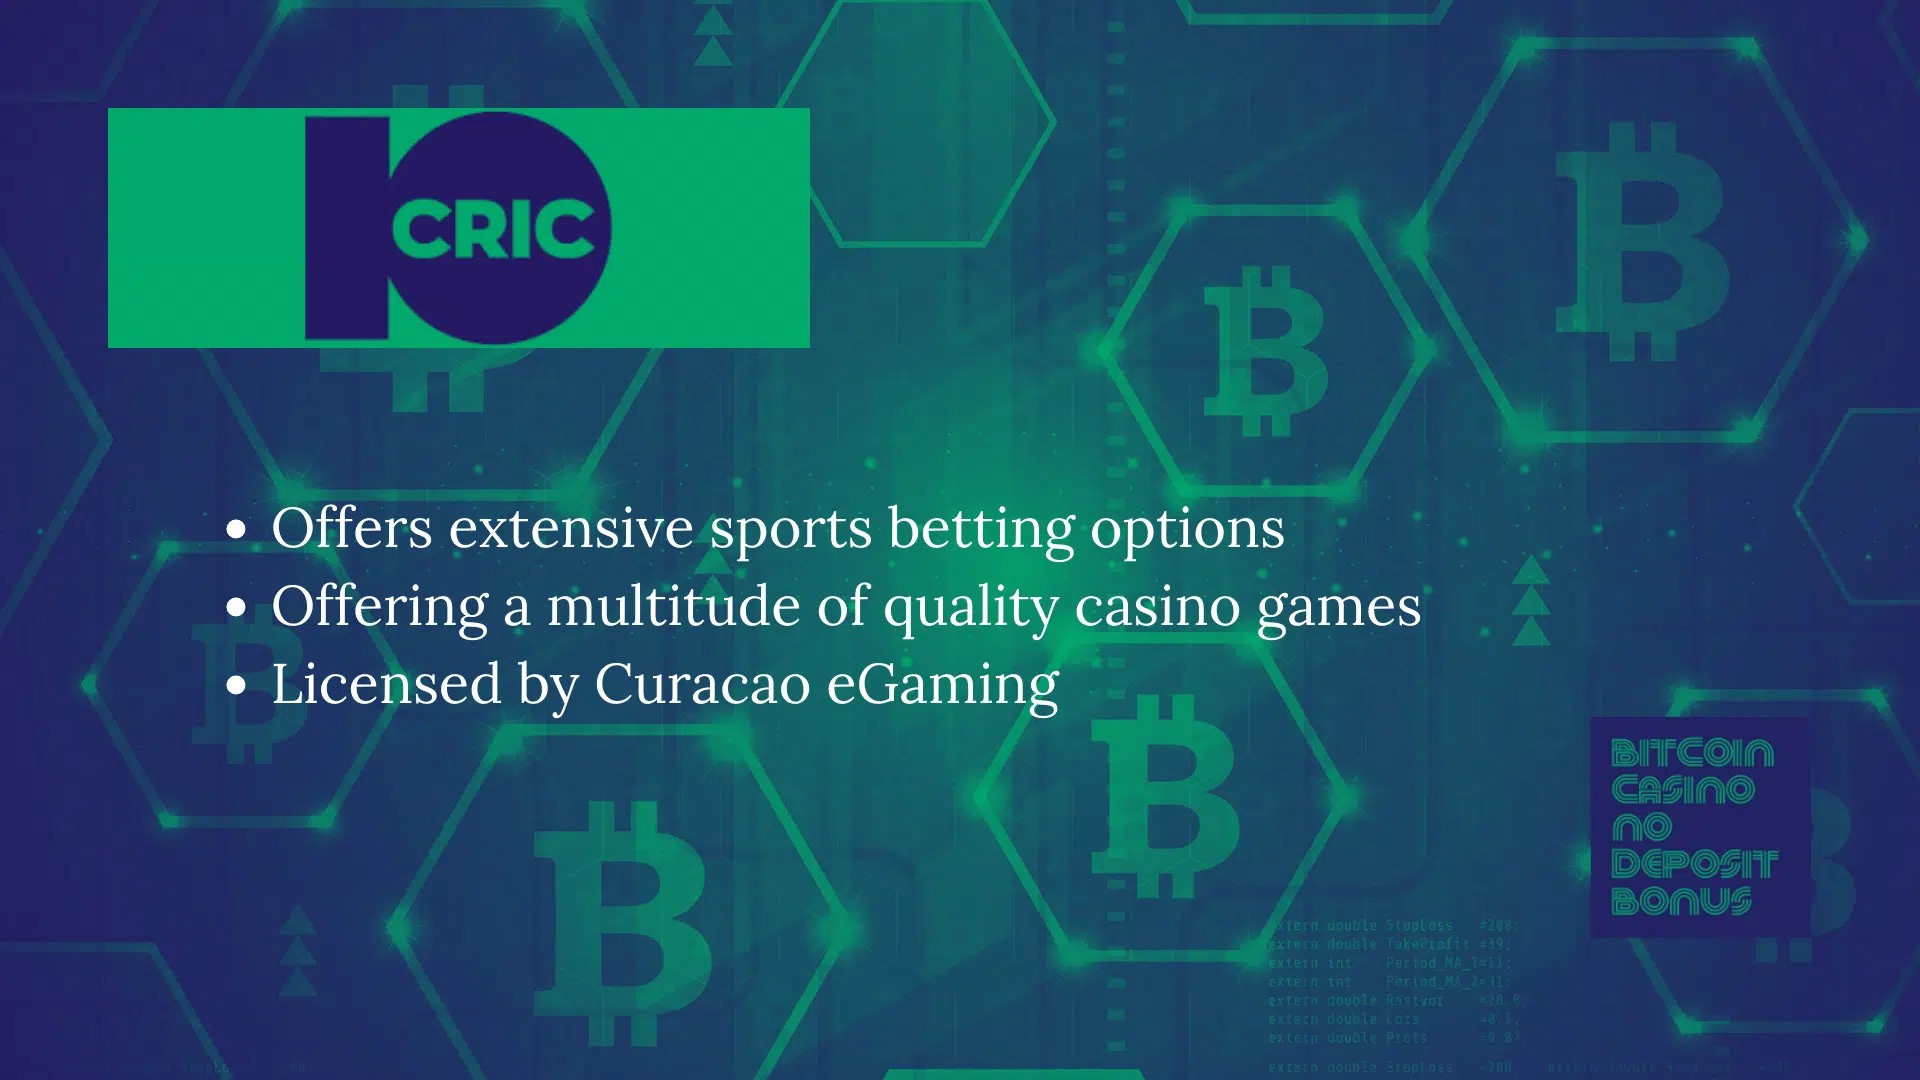 You are currently viewing 10Cric Casino Promo Codes – 10cric.com Free Bonus December 2022